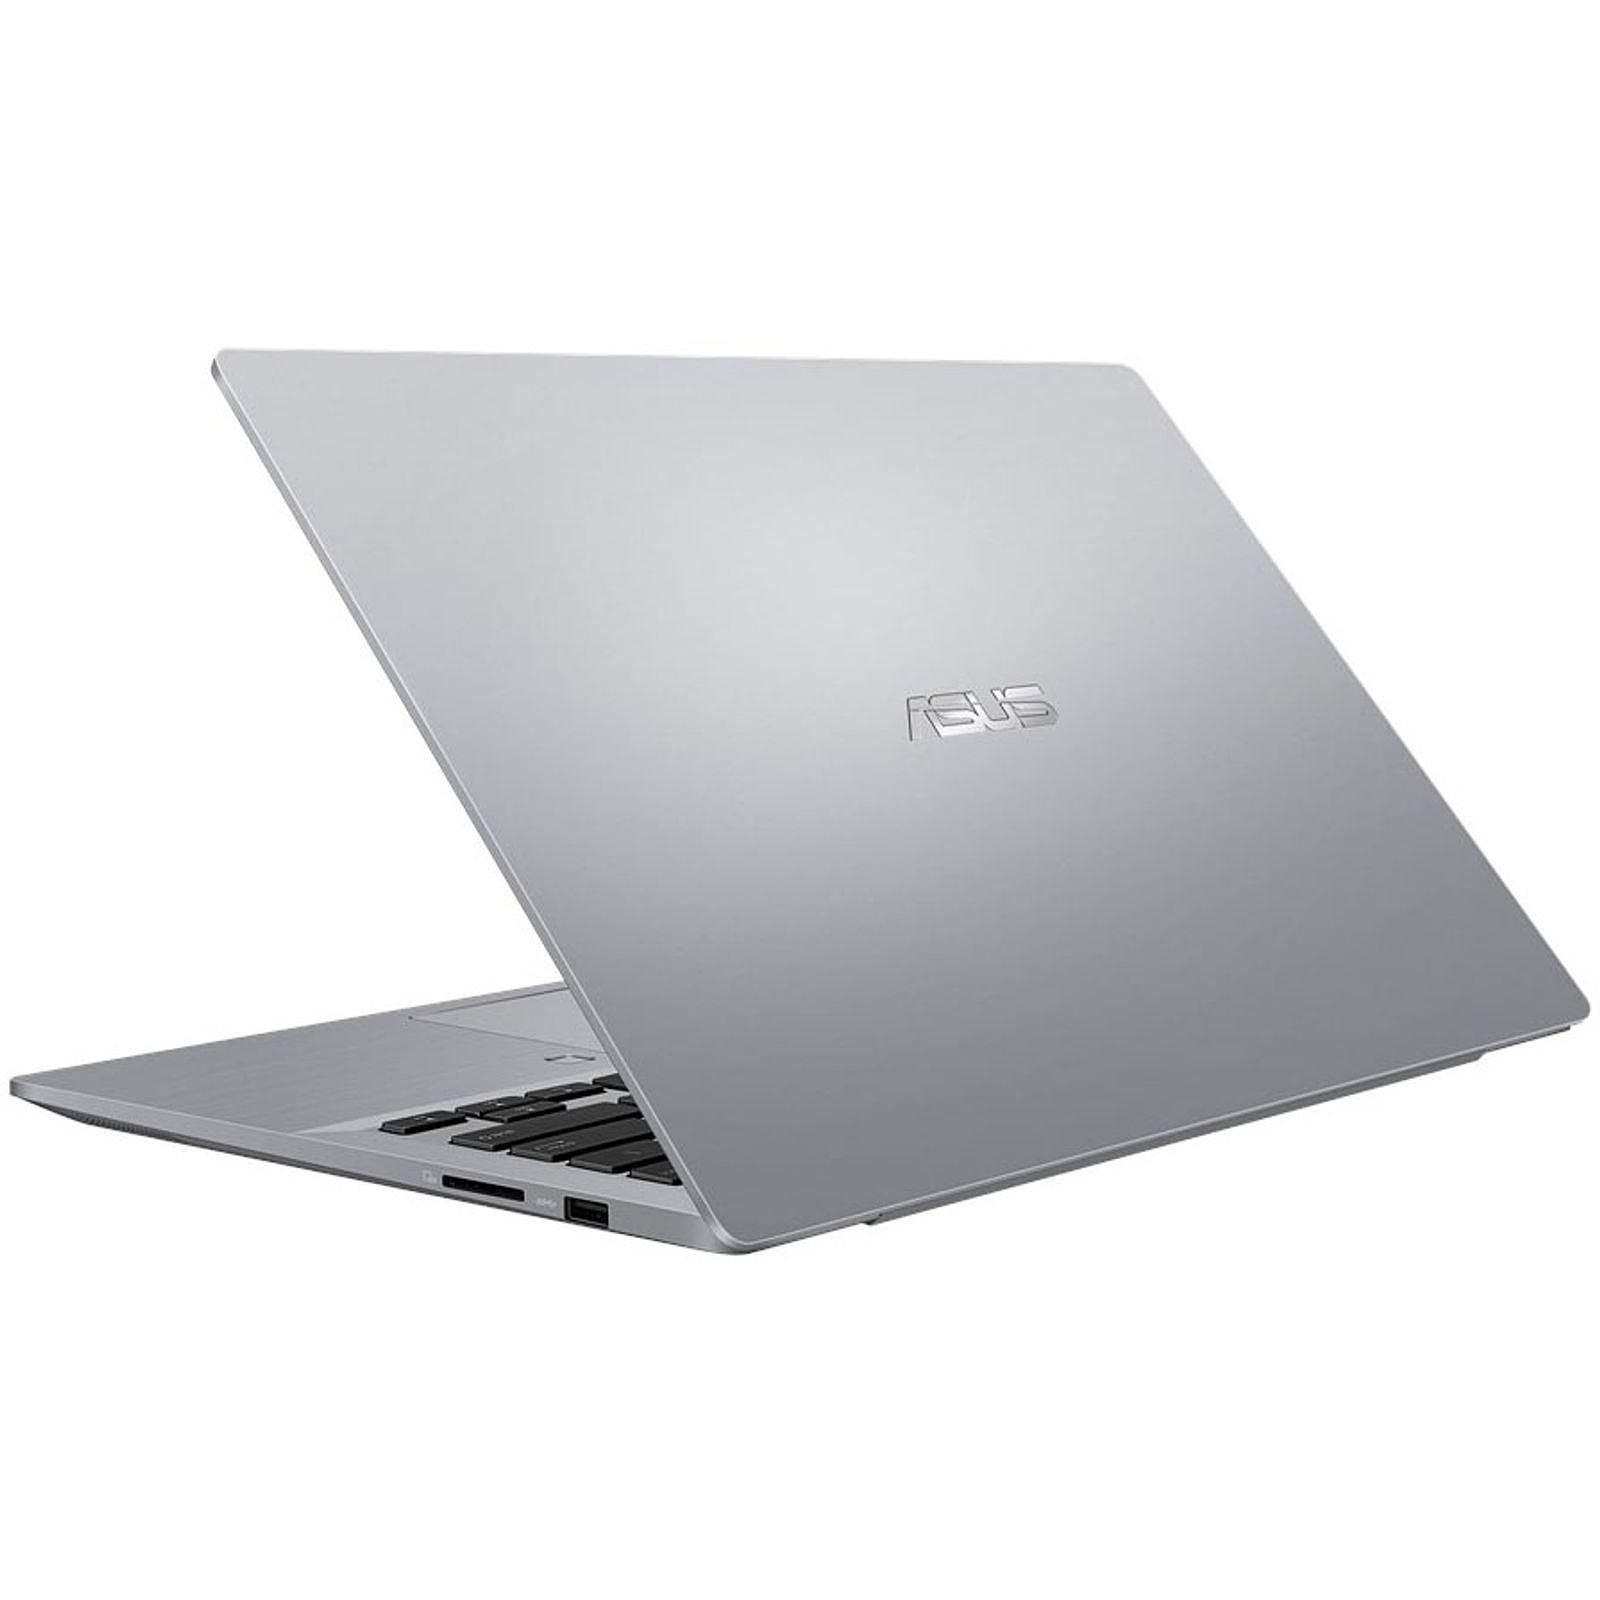 Asus 90NX01X1-M07820 - PC portable Asus - grosbill-pro.com - 1